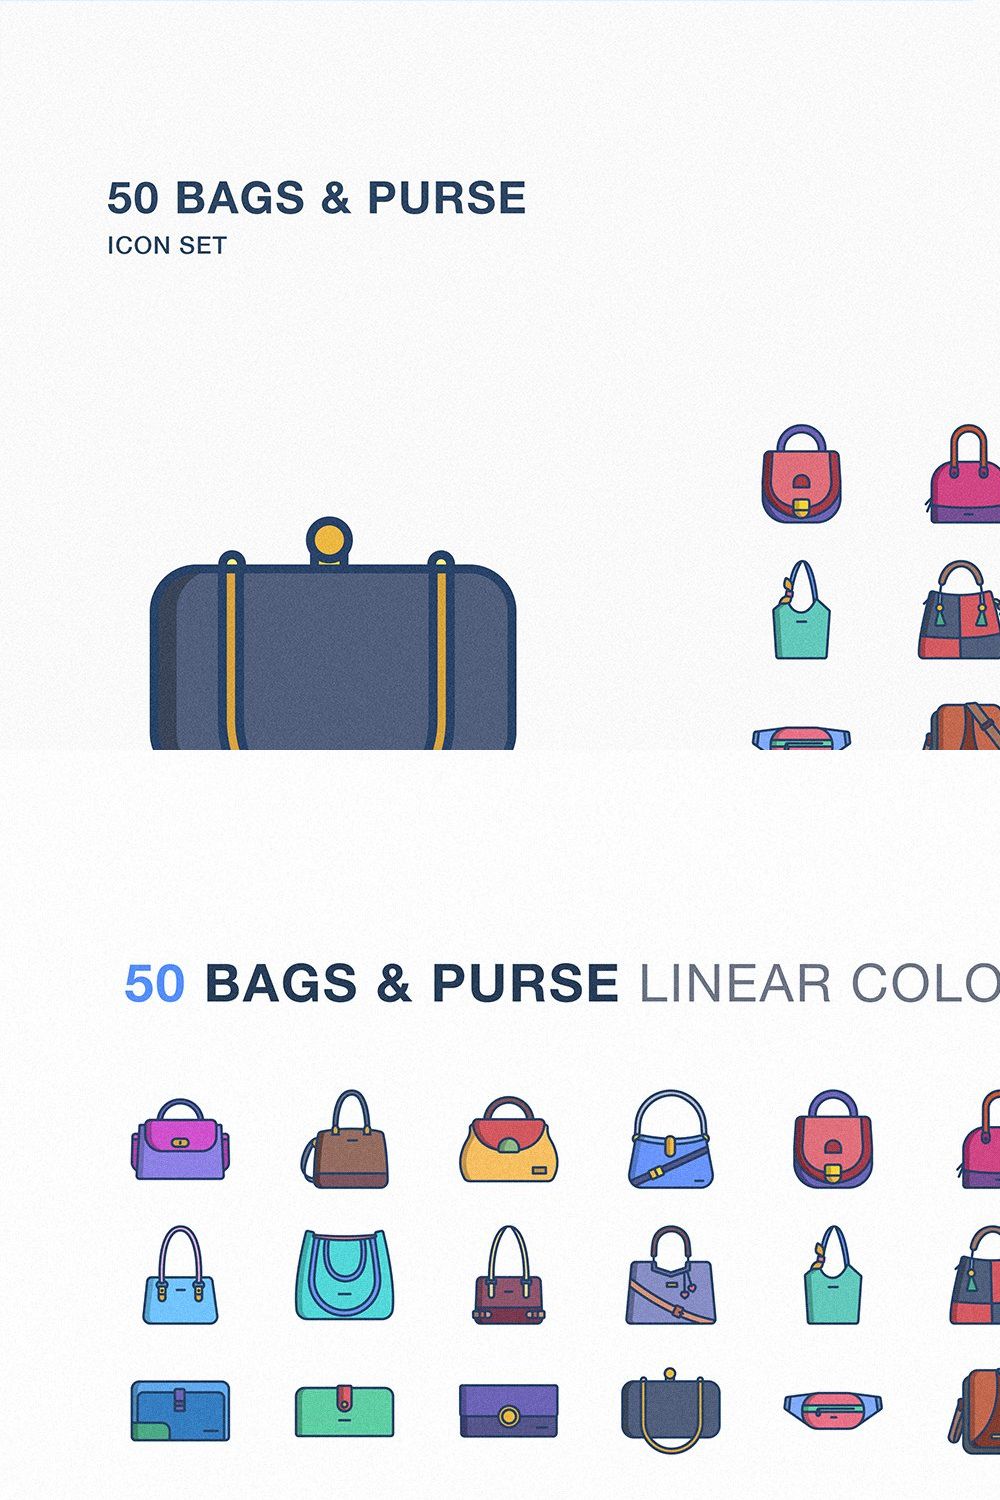 Bag and purse icon set pinterest preview image.